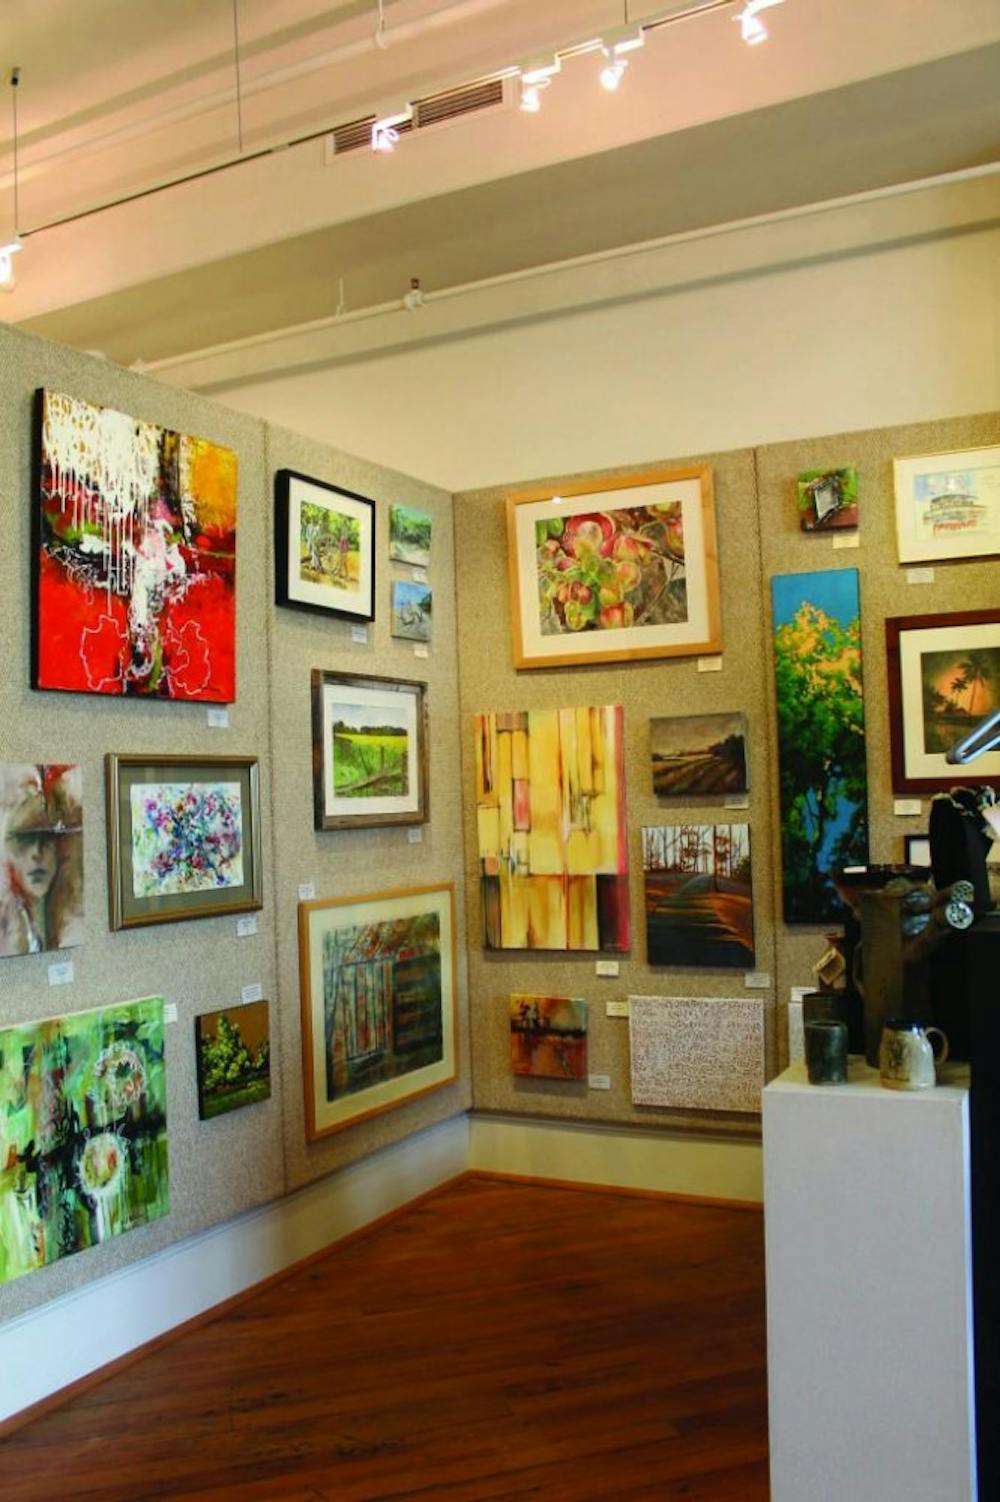 The Macon Arts Alliance, located downtown, unifies 60 different arts organizations in central Georgia. The gallery is open on weekdays for 11 a.m.-5 p.m. and Saturdays from 10 a.m.-4 p.m.